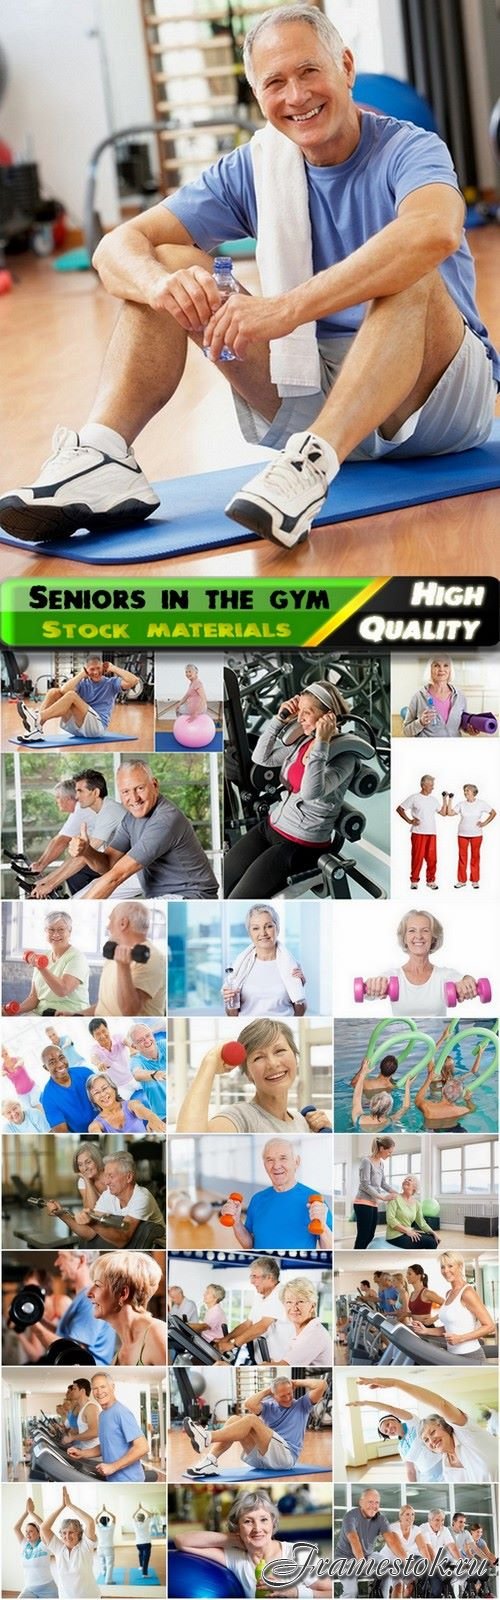 Seniors in the gym and active old people - 25 HQ Jpg